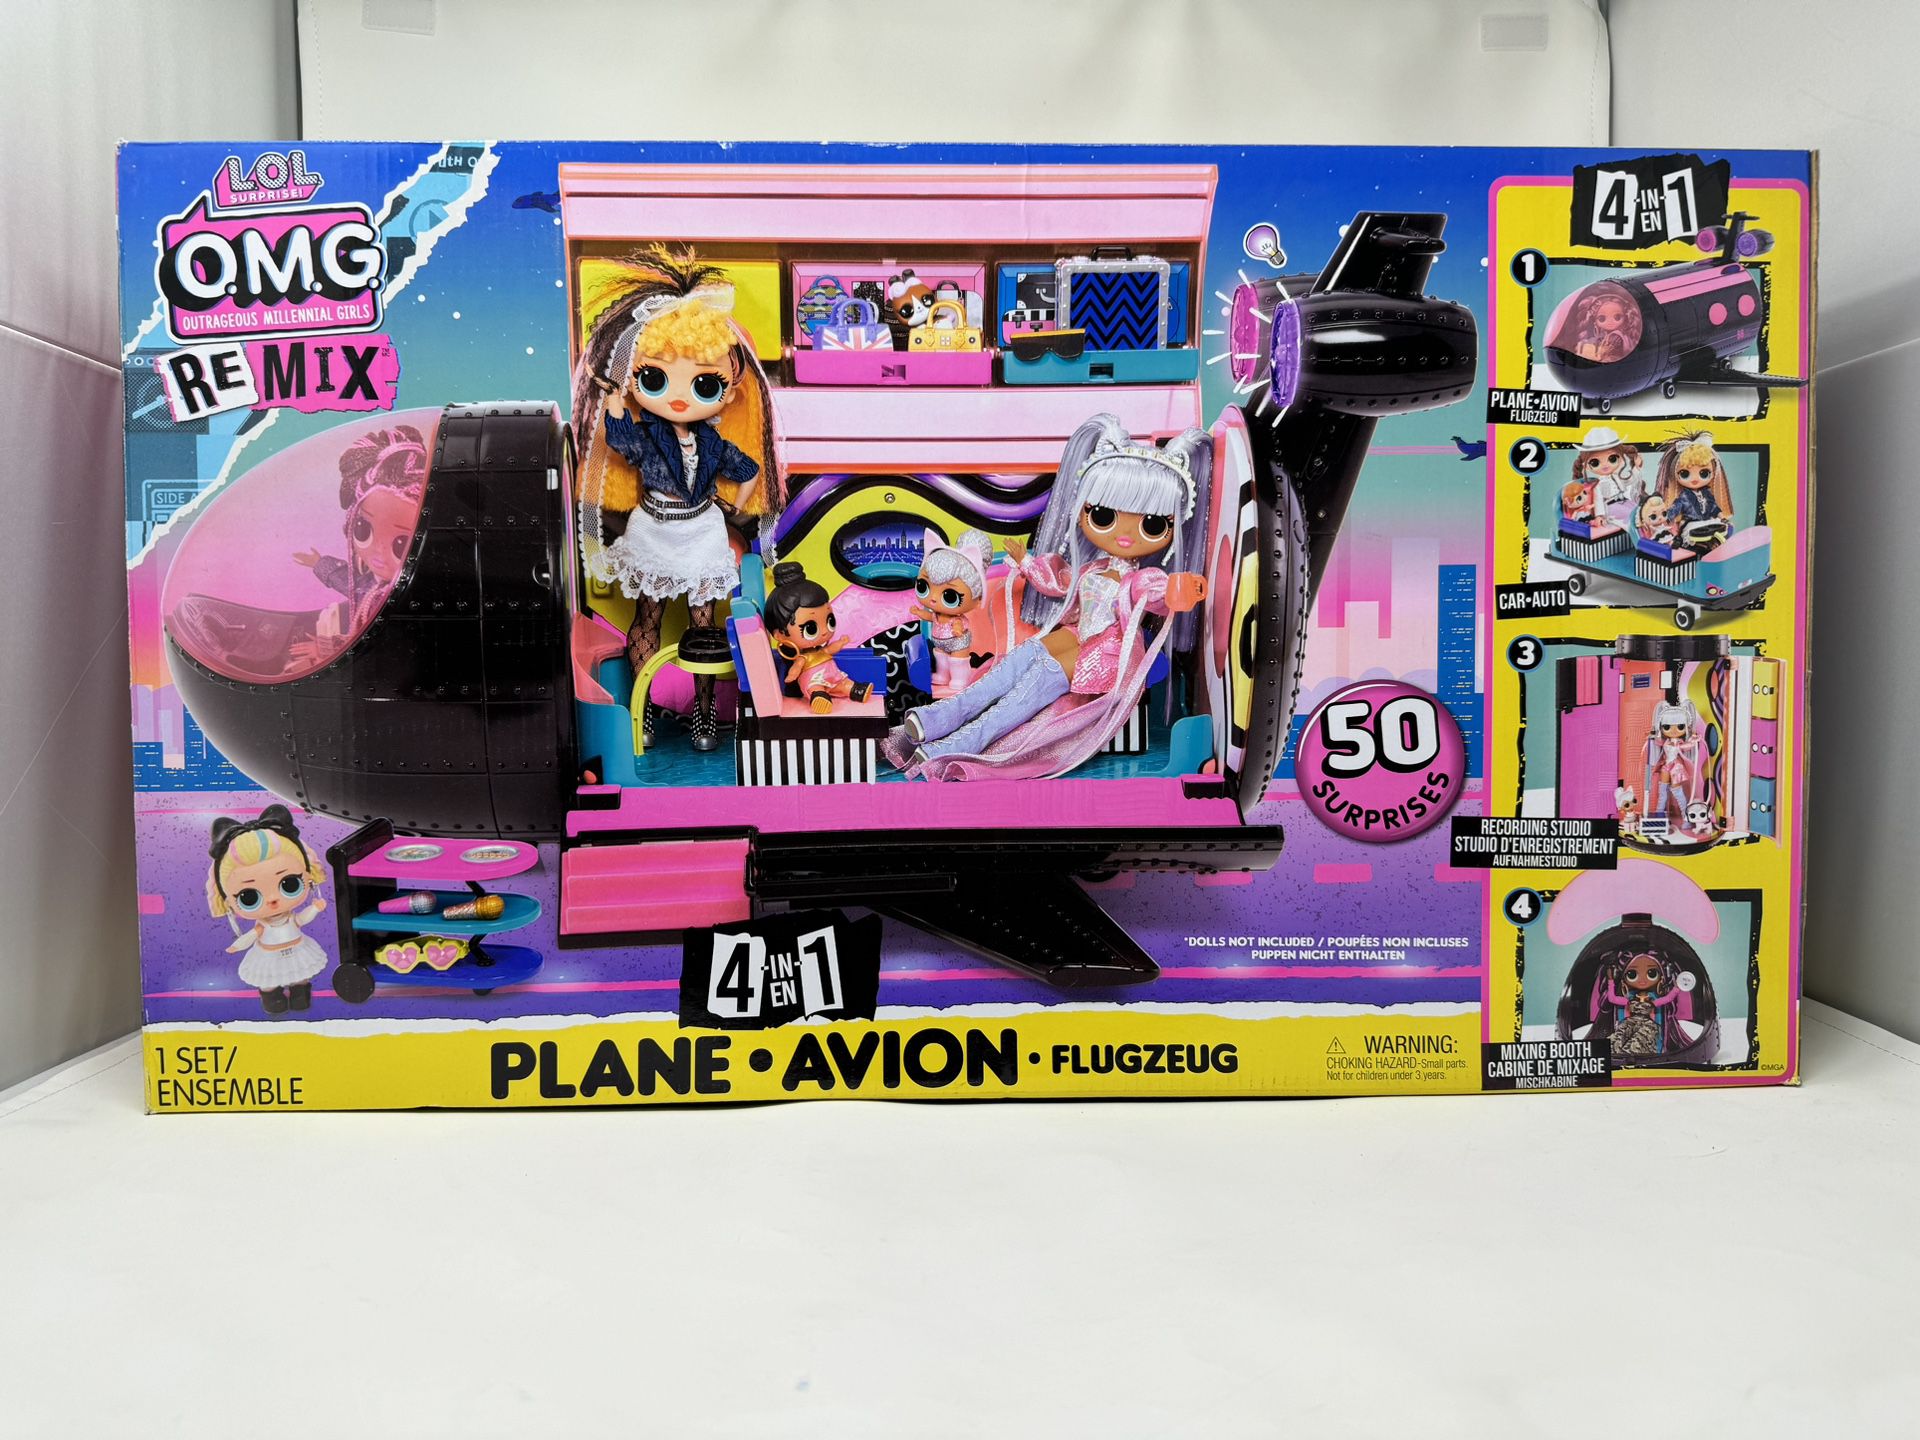 LOL Surprise OMG Remix 4-in-1 Plane Playset Transforms with 50 Surprises (Brand New)